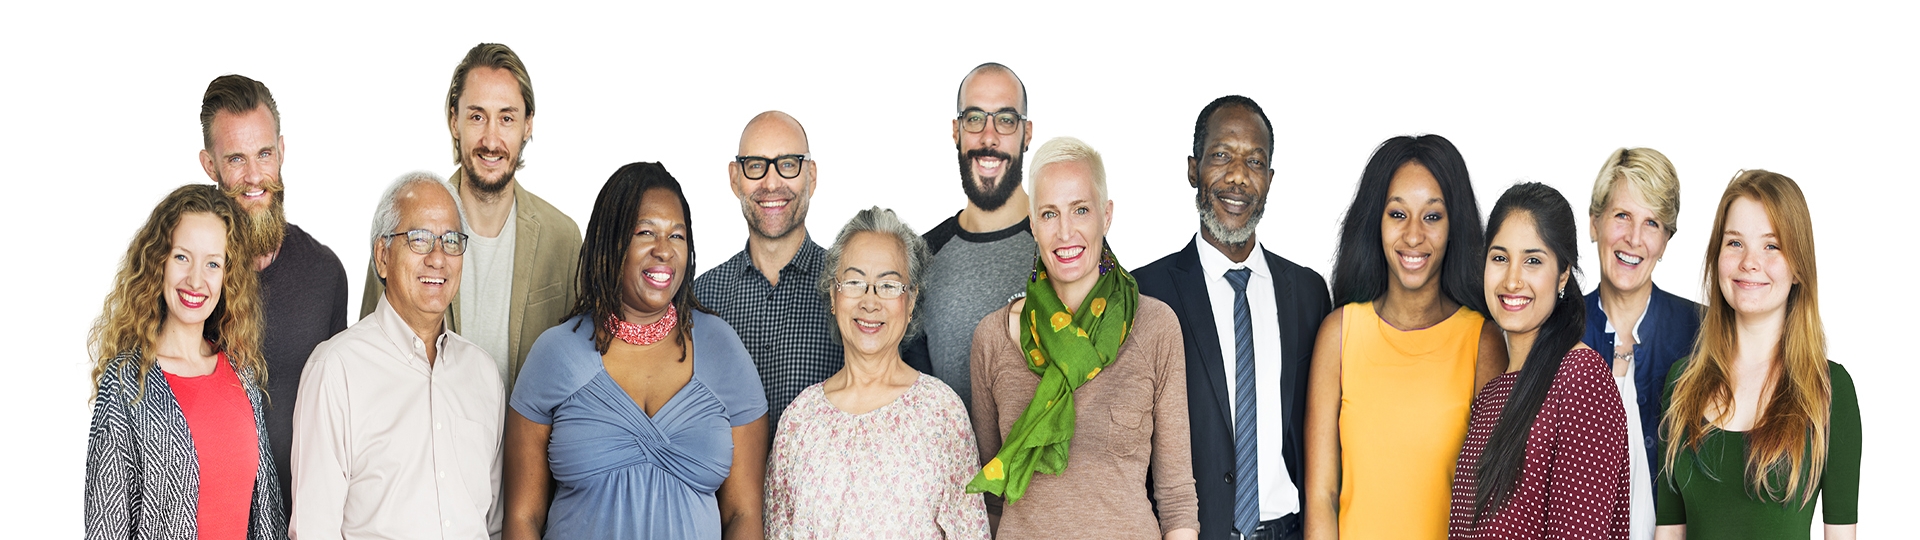 Banner of a diverse group of people smiling. 